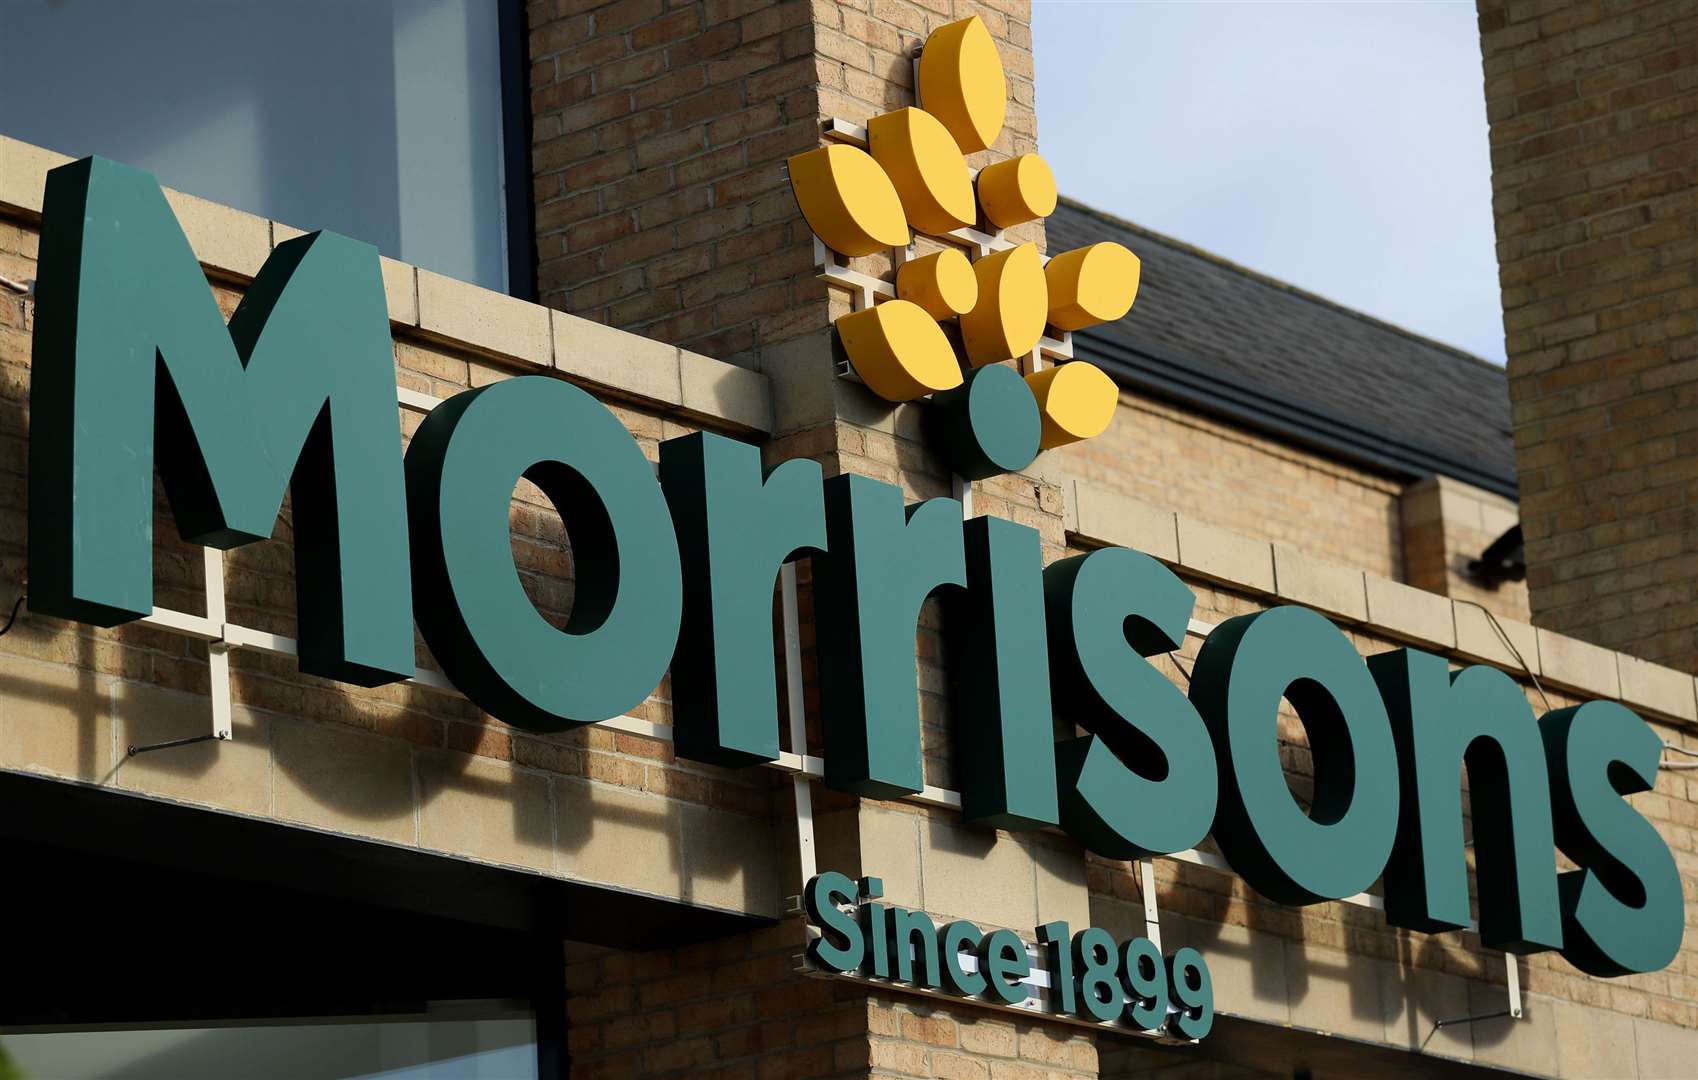 Morrisons is expected to close all its stores on Boxing Day